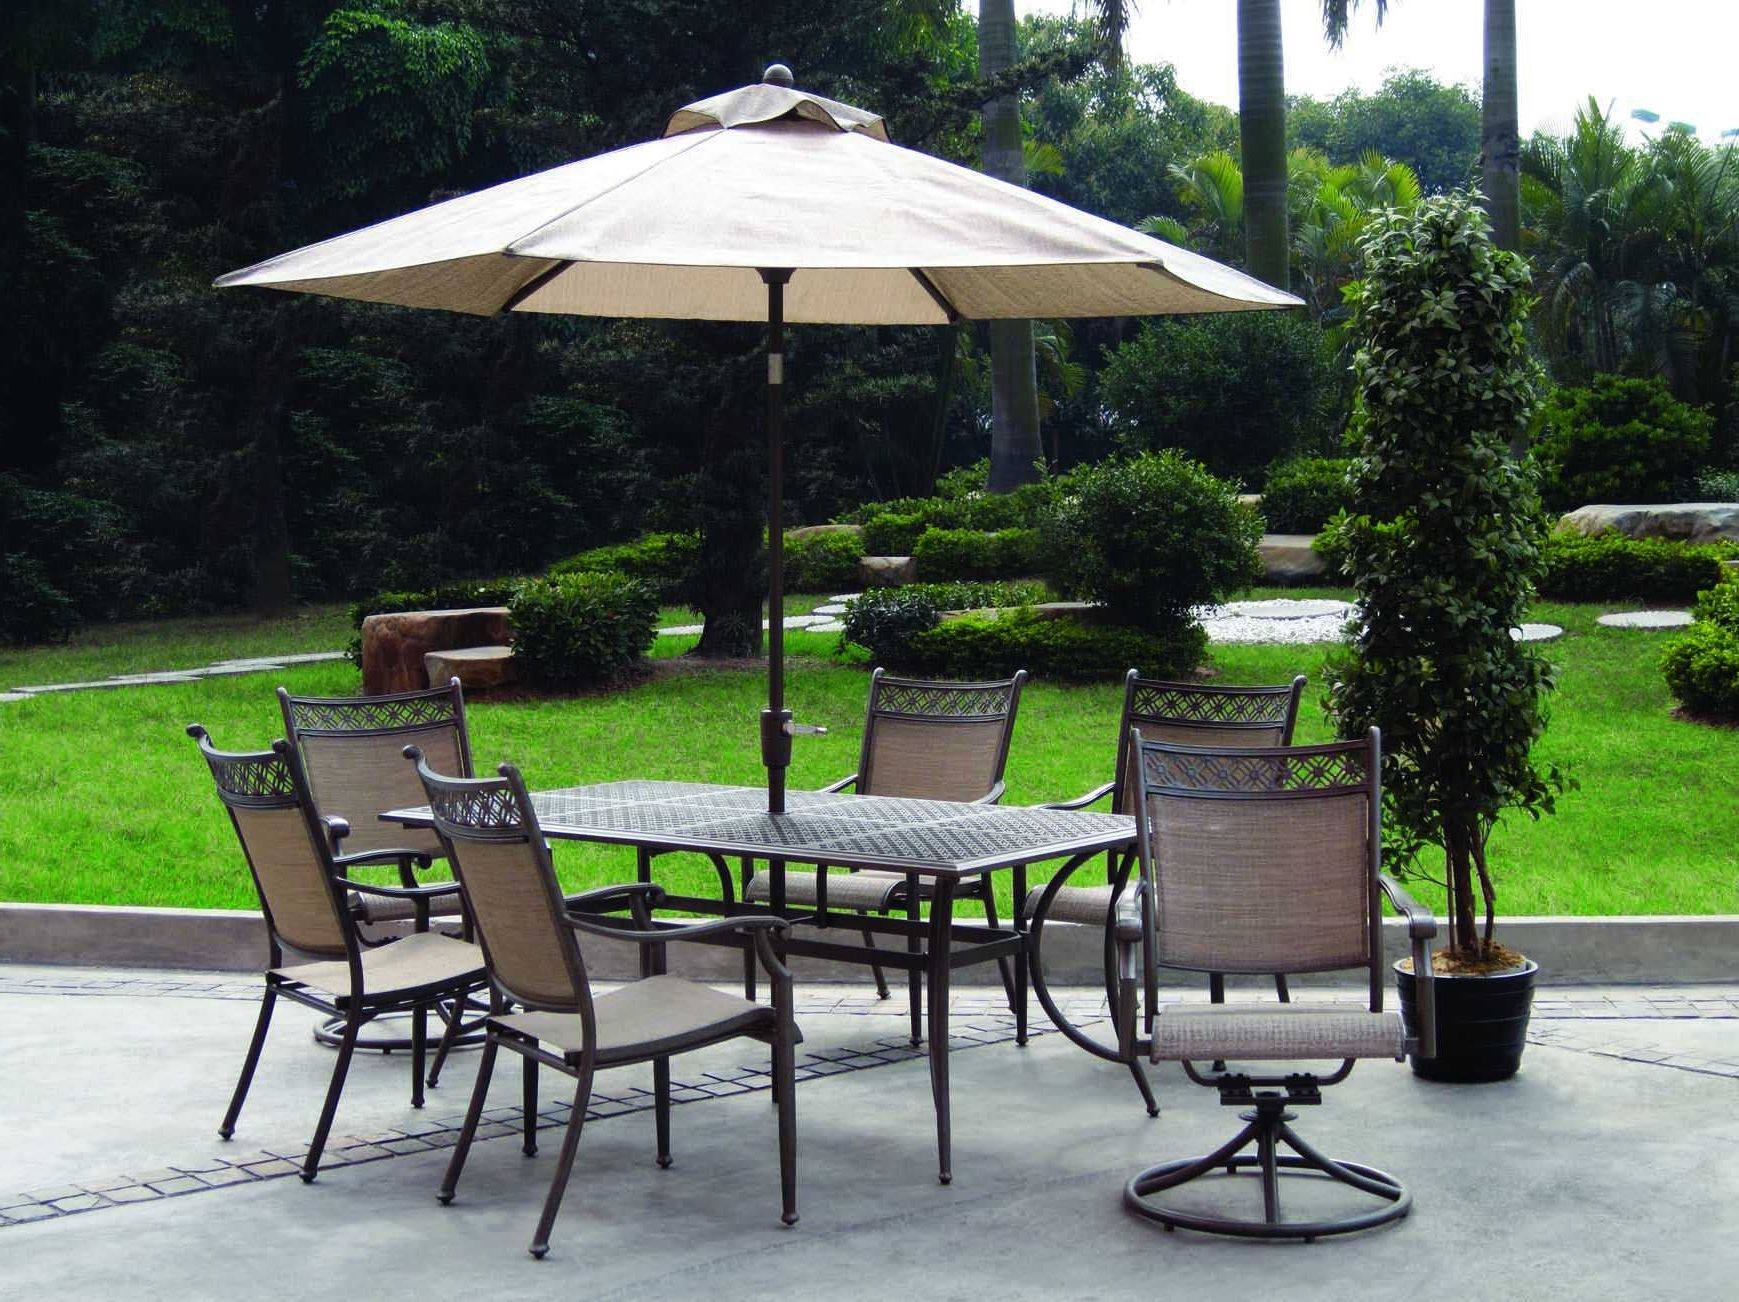 Sears Patio Umbrellas Within 2019 Enchanting Cheap Patio Umbrellas With Furniture Alluring Collection (View 6 of 20)